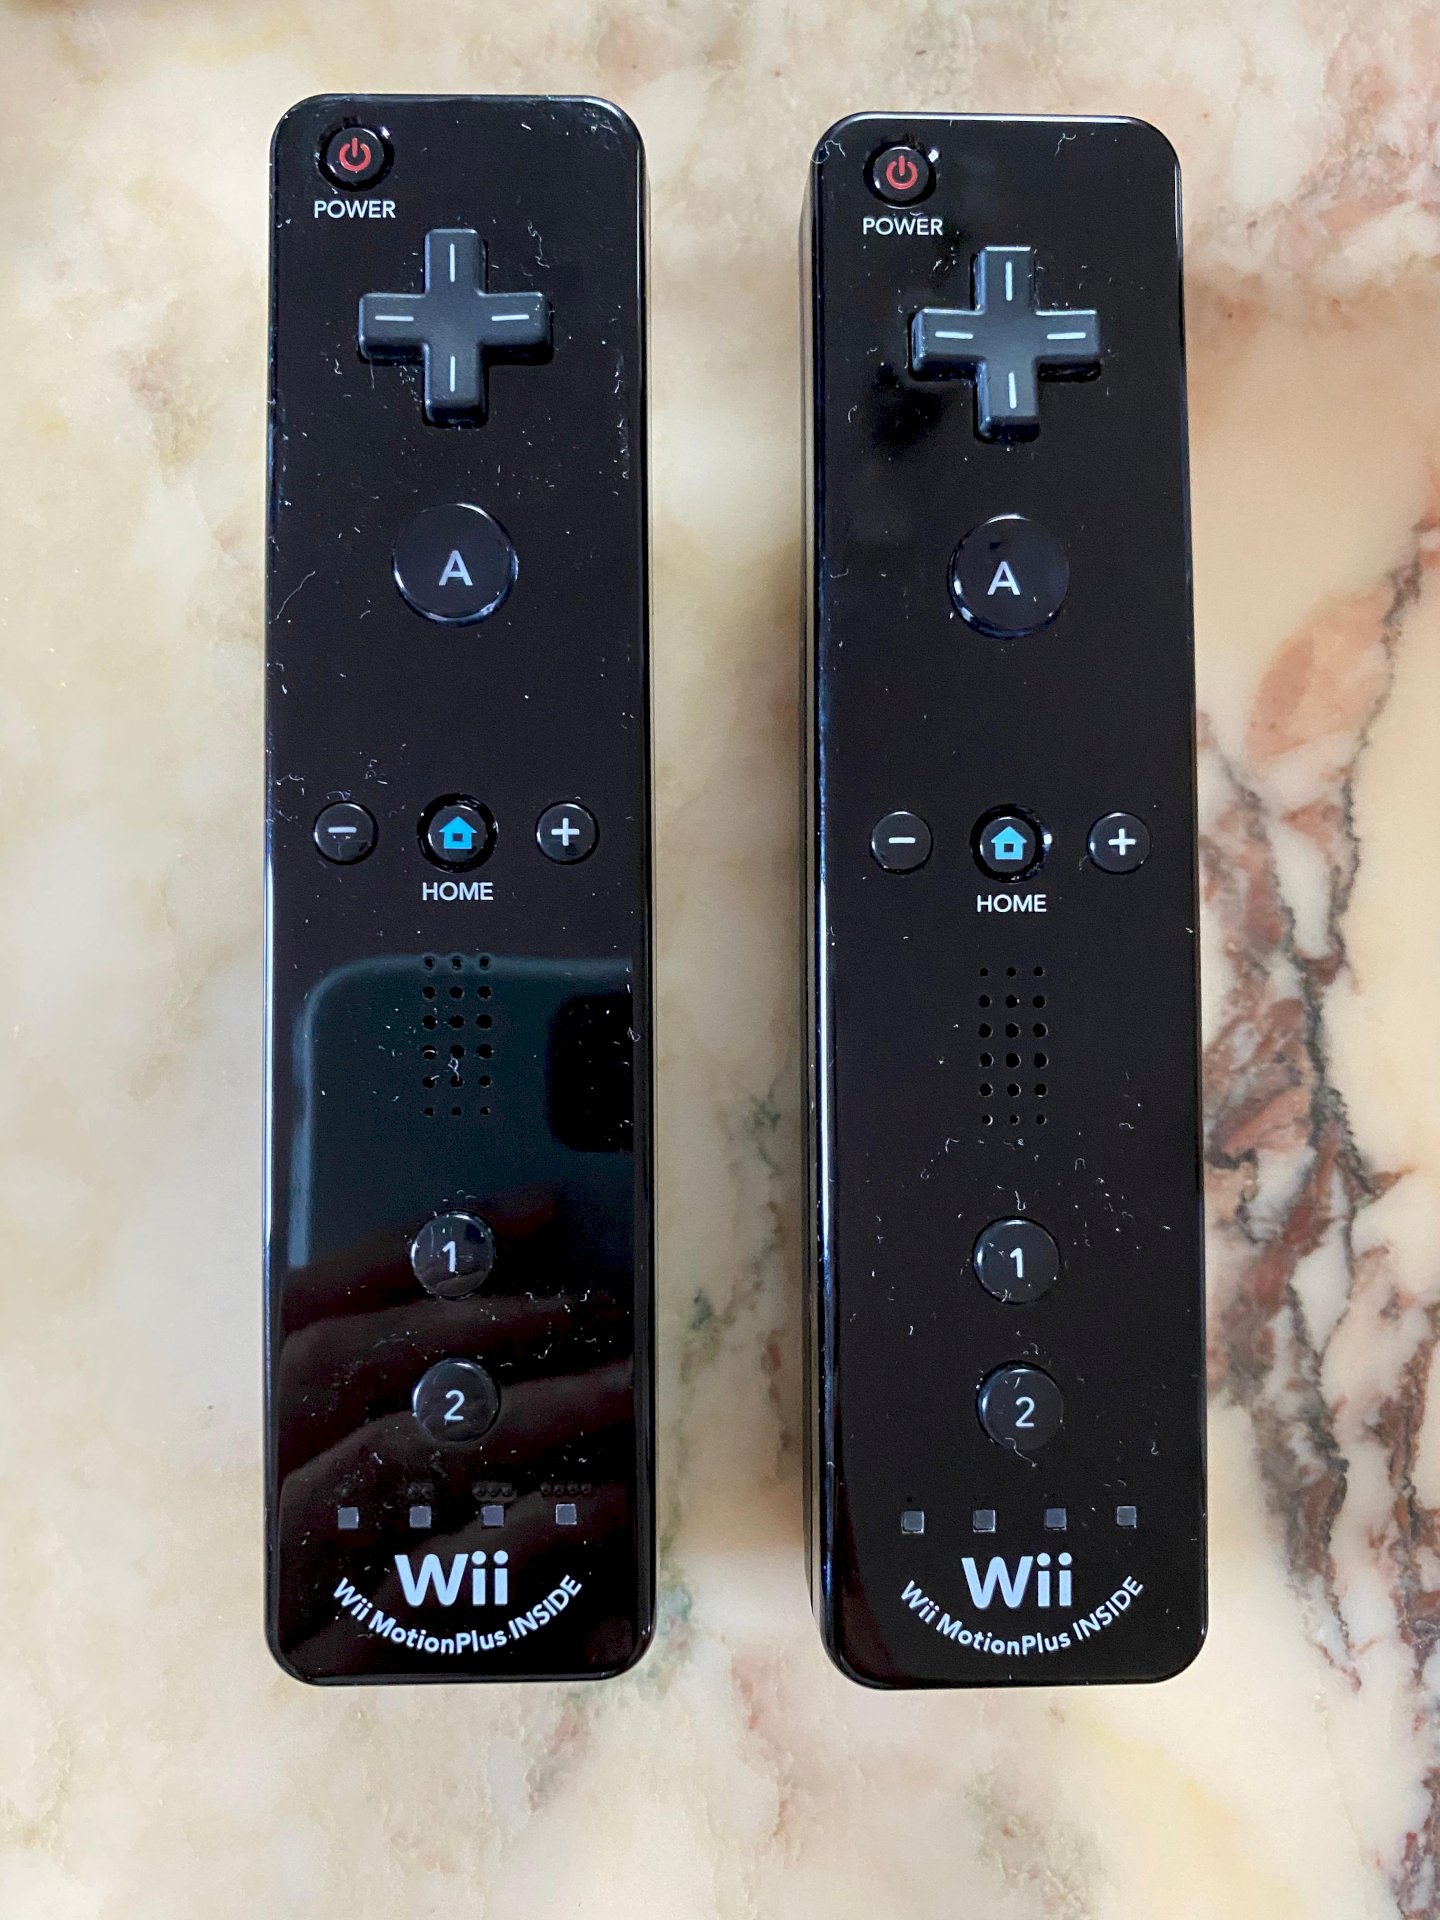 Are the Wii Controller Motion Plus Inside originals from Nintendo